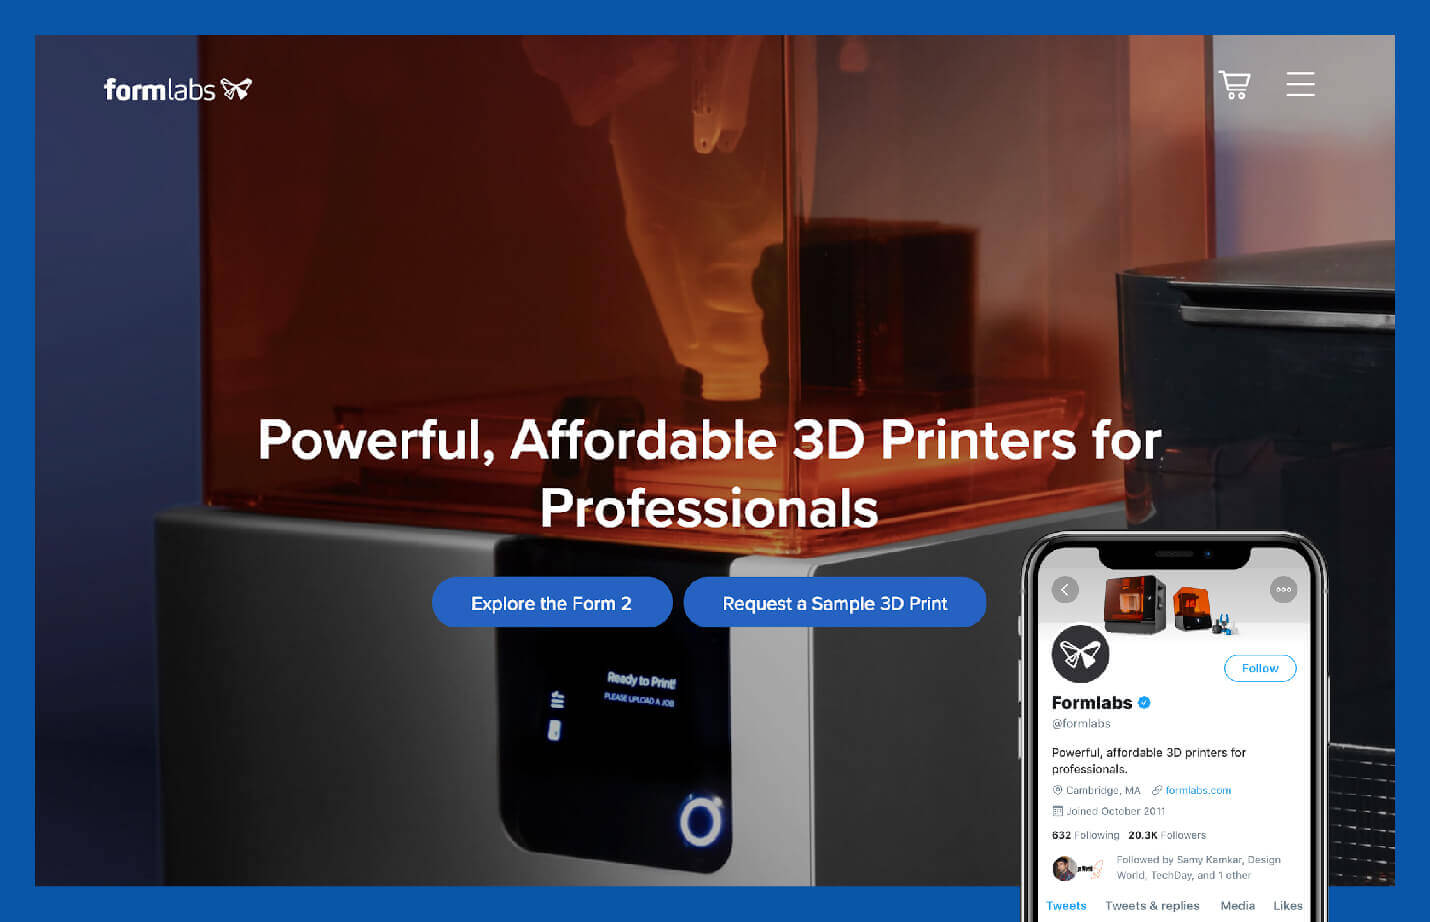 value proposition example from formlabs